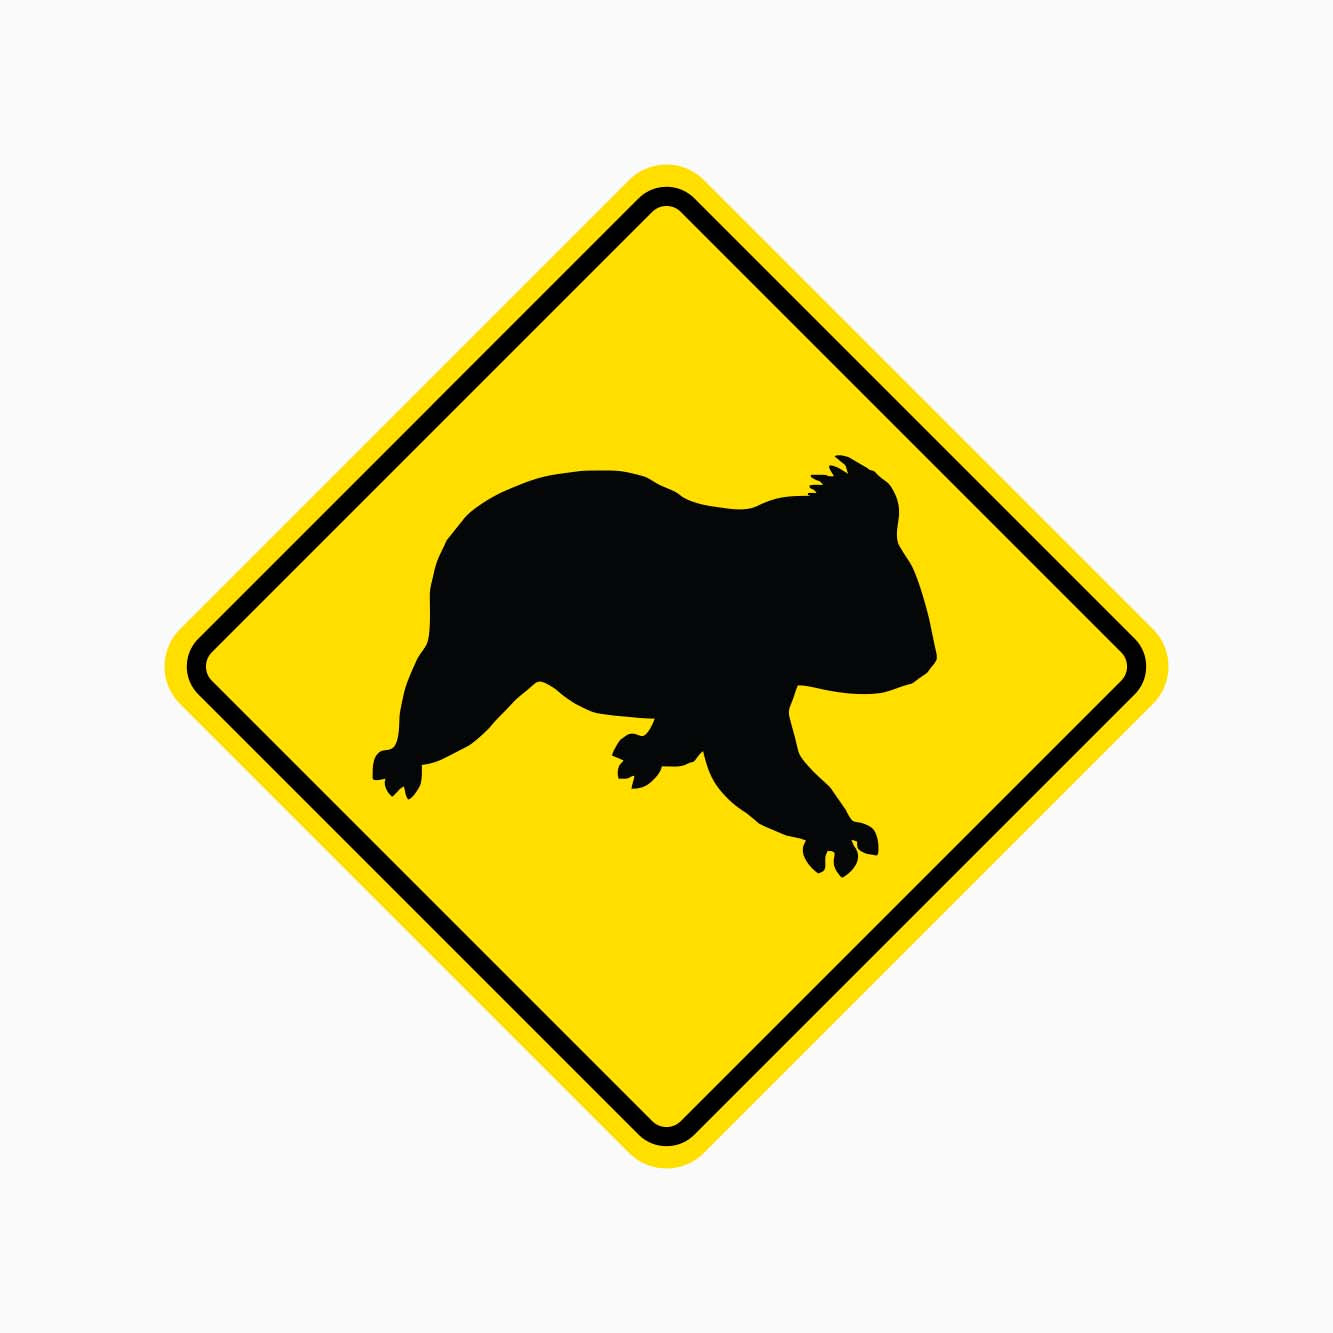 KOALAS ON ROAD SIGN W5-47 - GET SIGNS